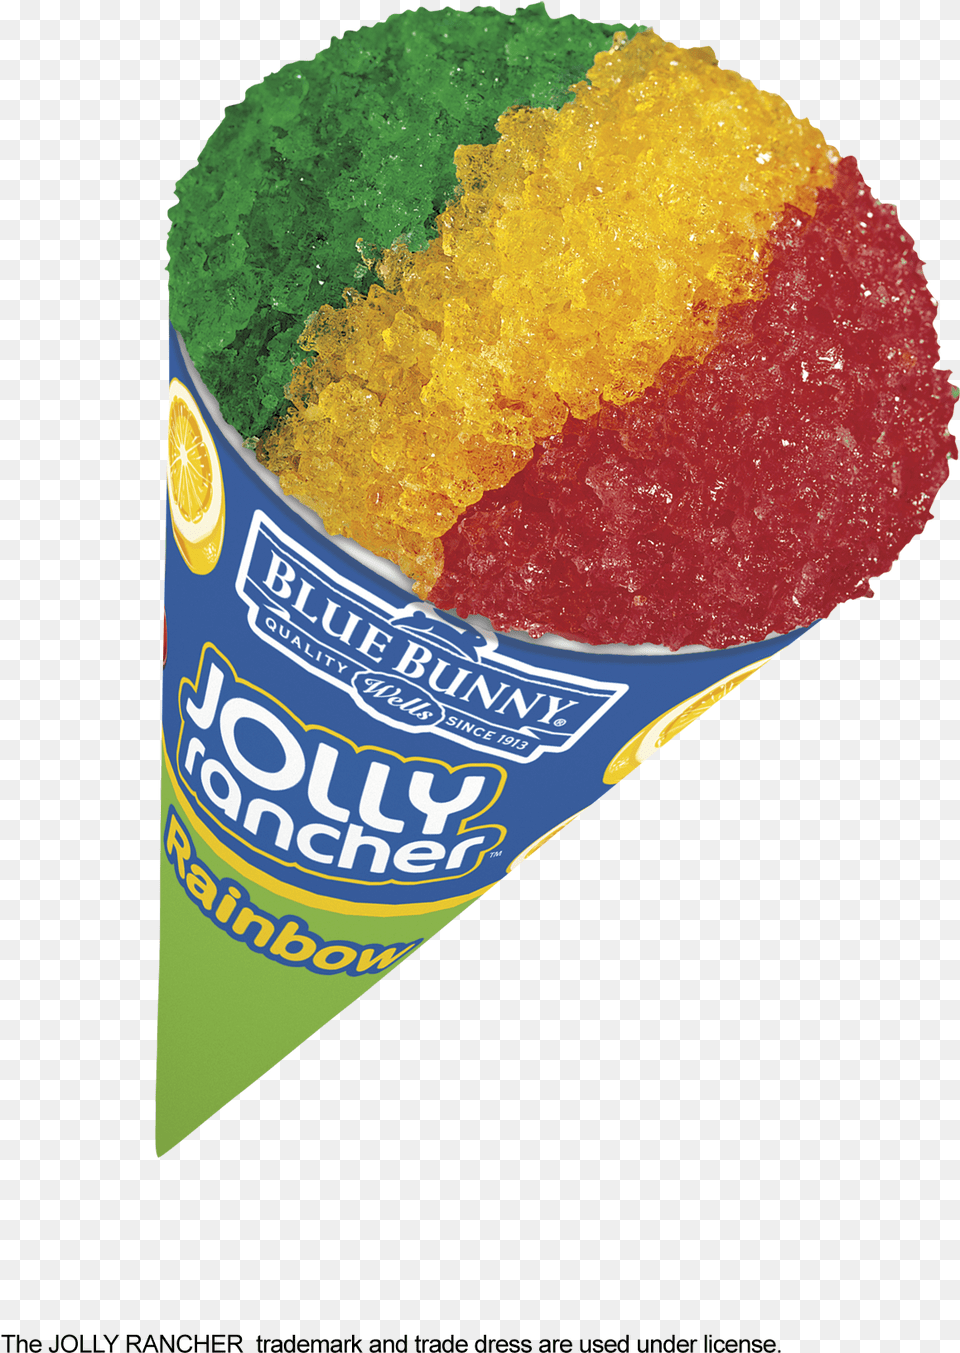 Jolly Rancher Snow Cone Ice Cream Distributors Of Florida Jolly Rancher Ice Cream, Food, Ketchup, Sweets Png Image